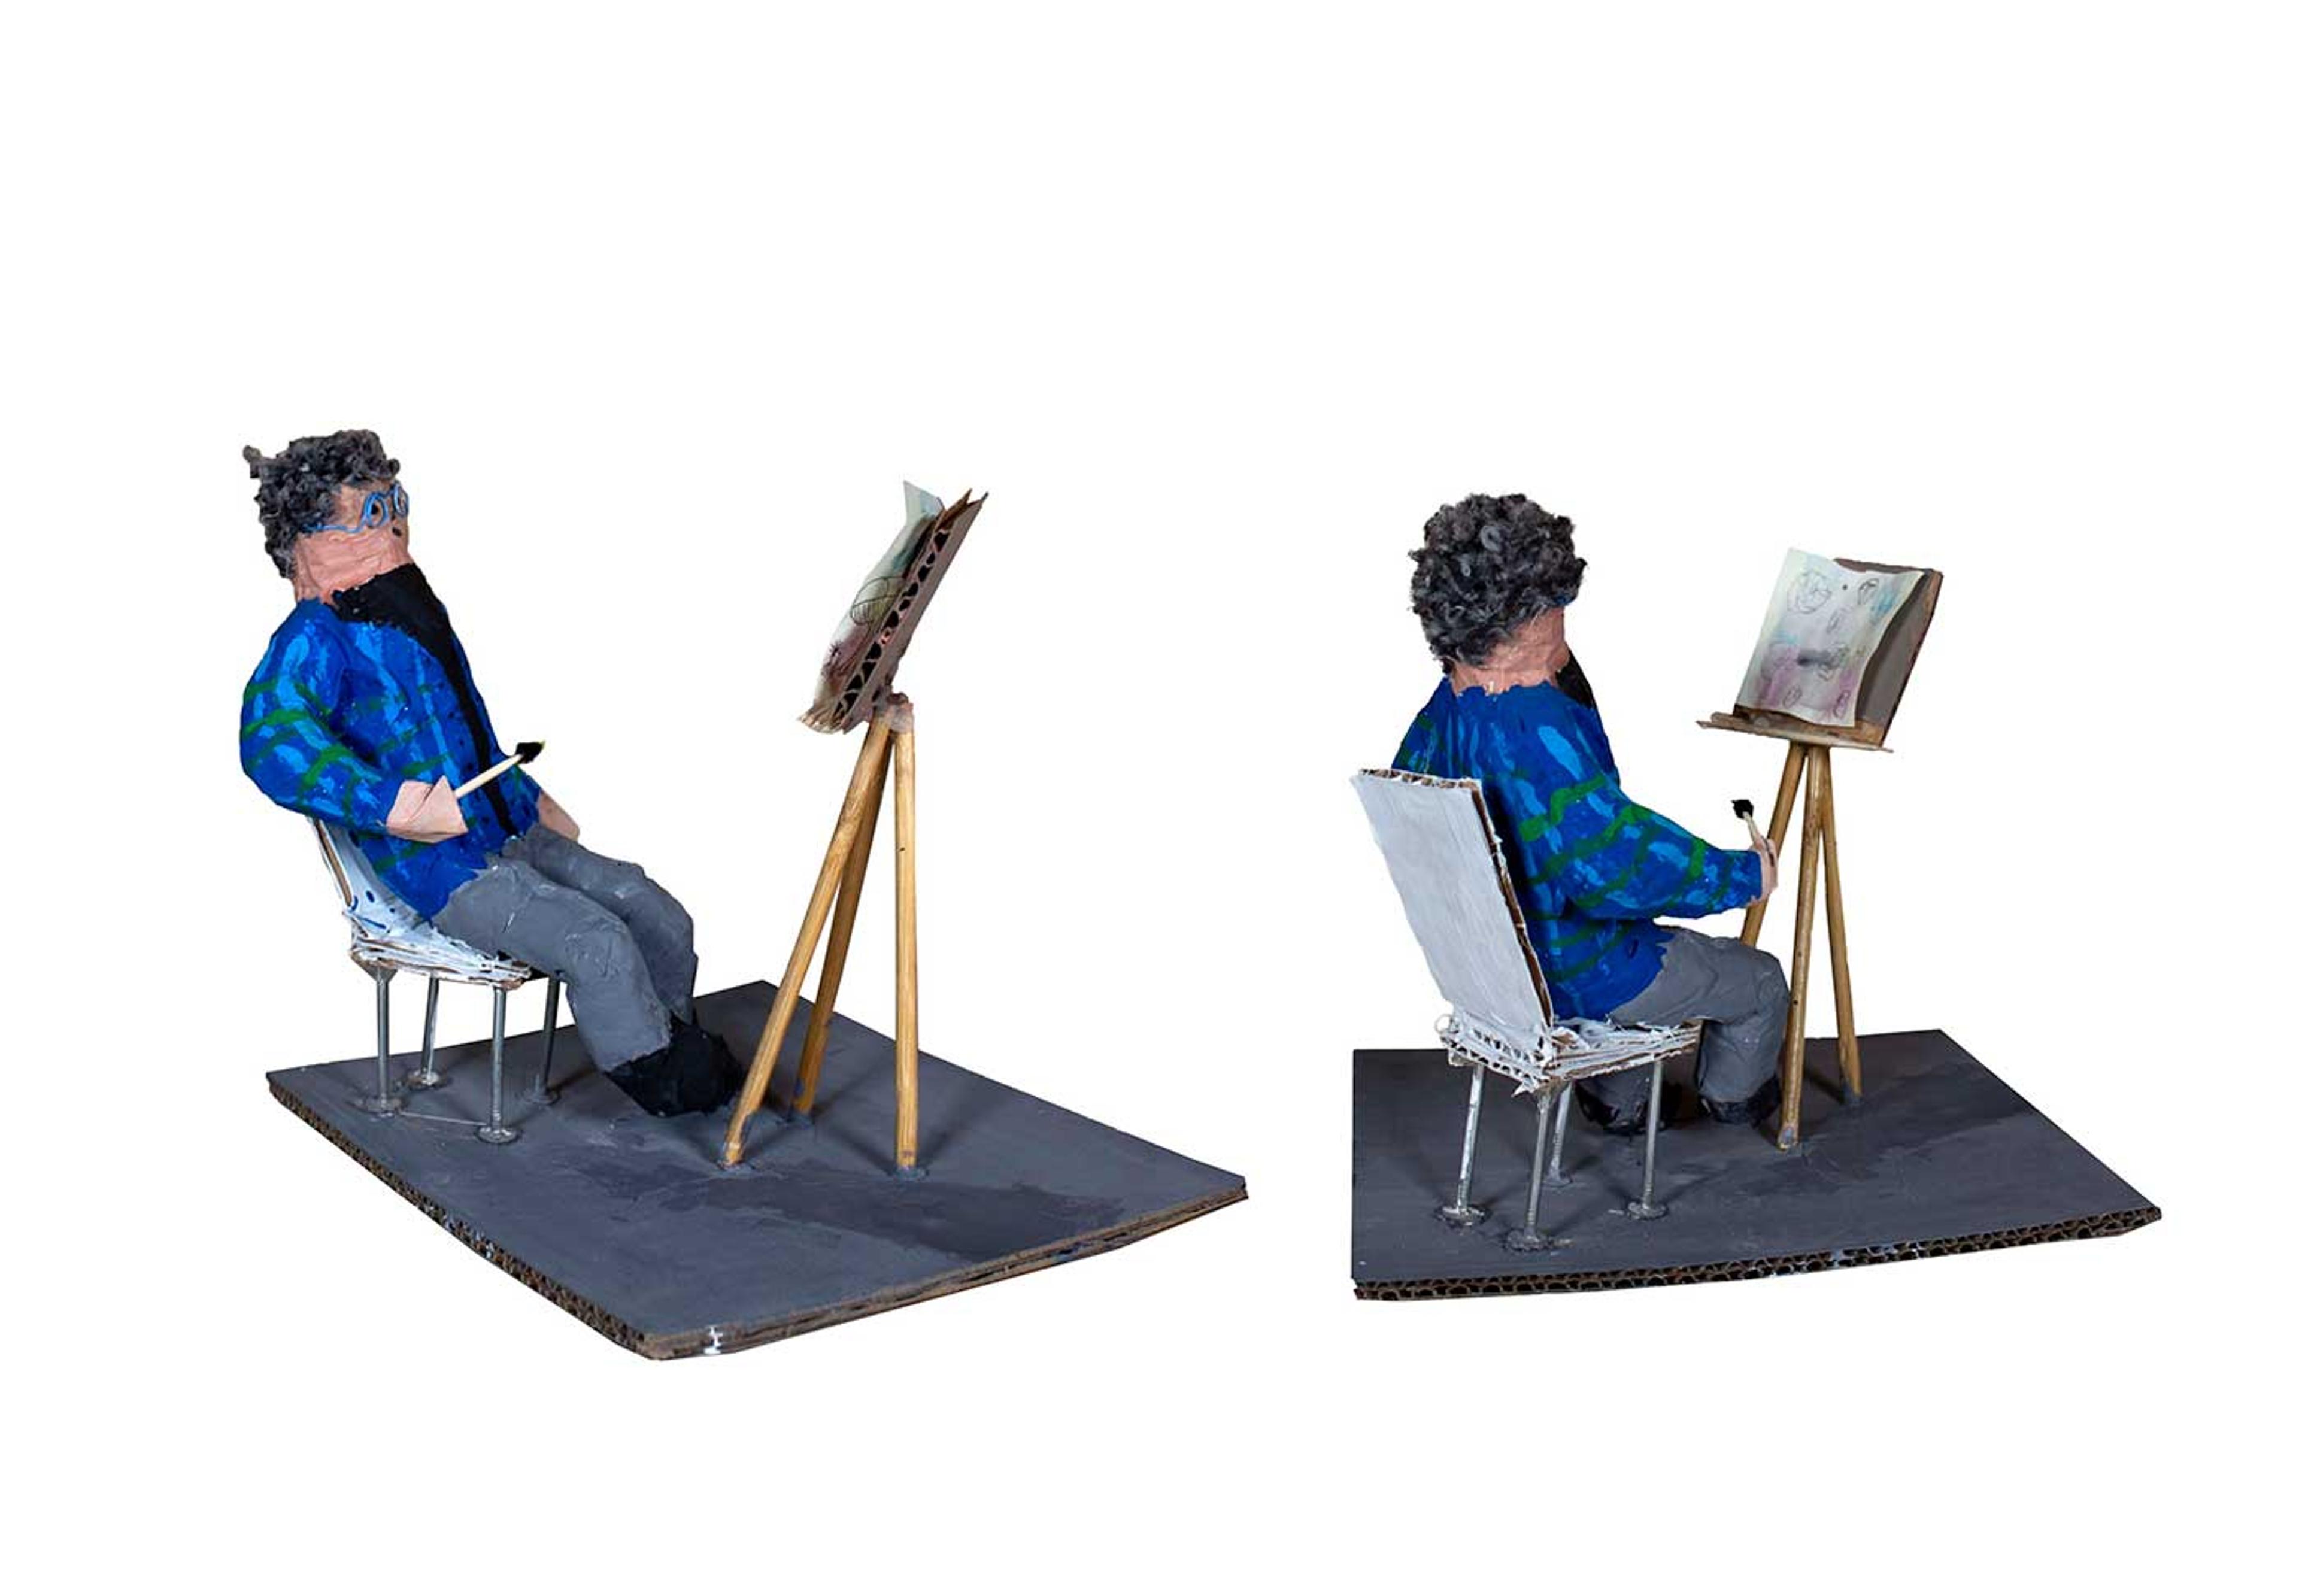 Papier mâché scultpure of a man sitting in front of an easel holding a paintbrush.